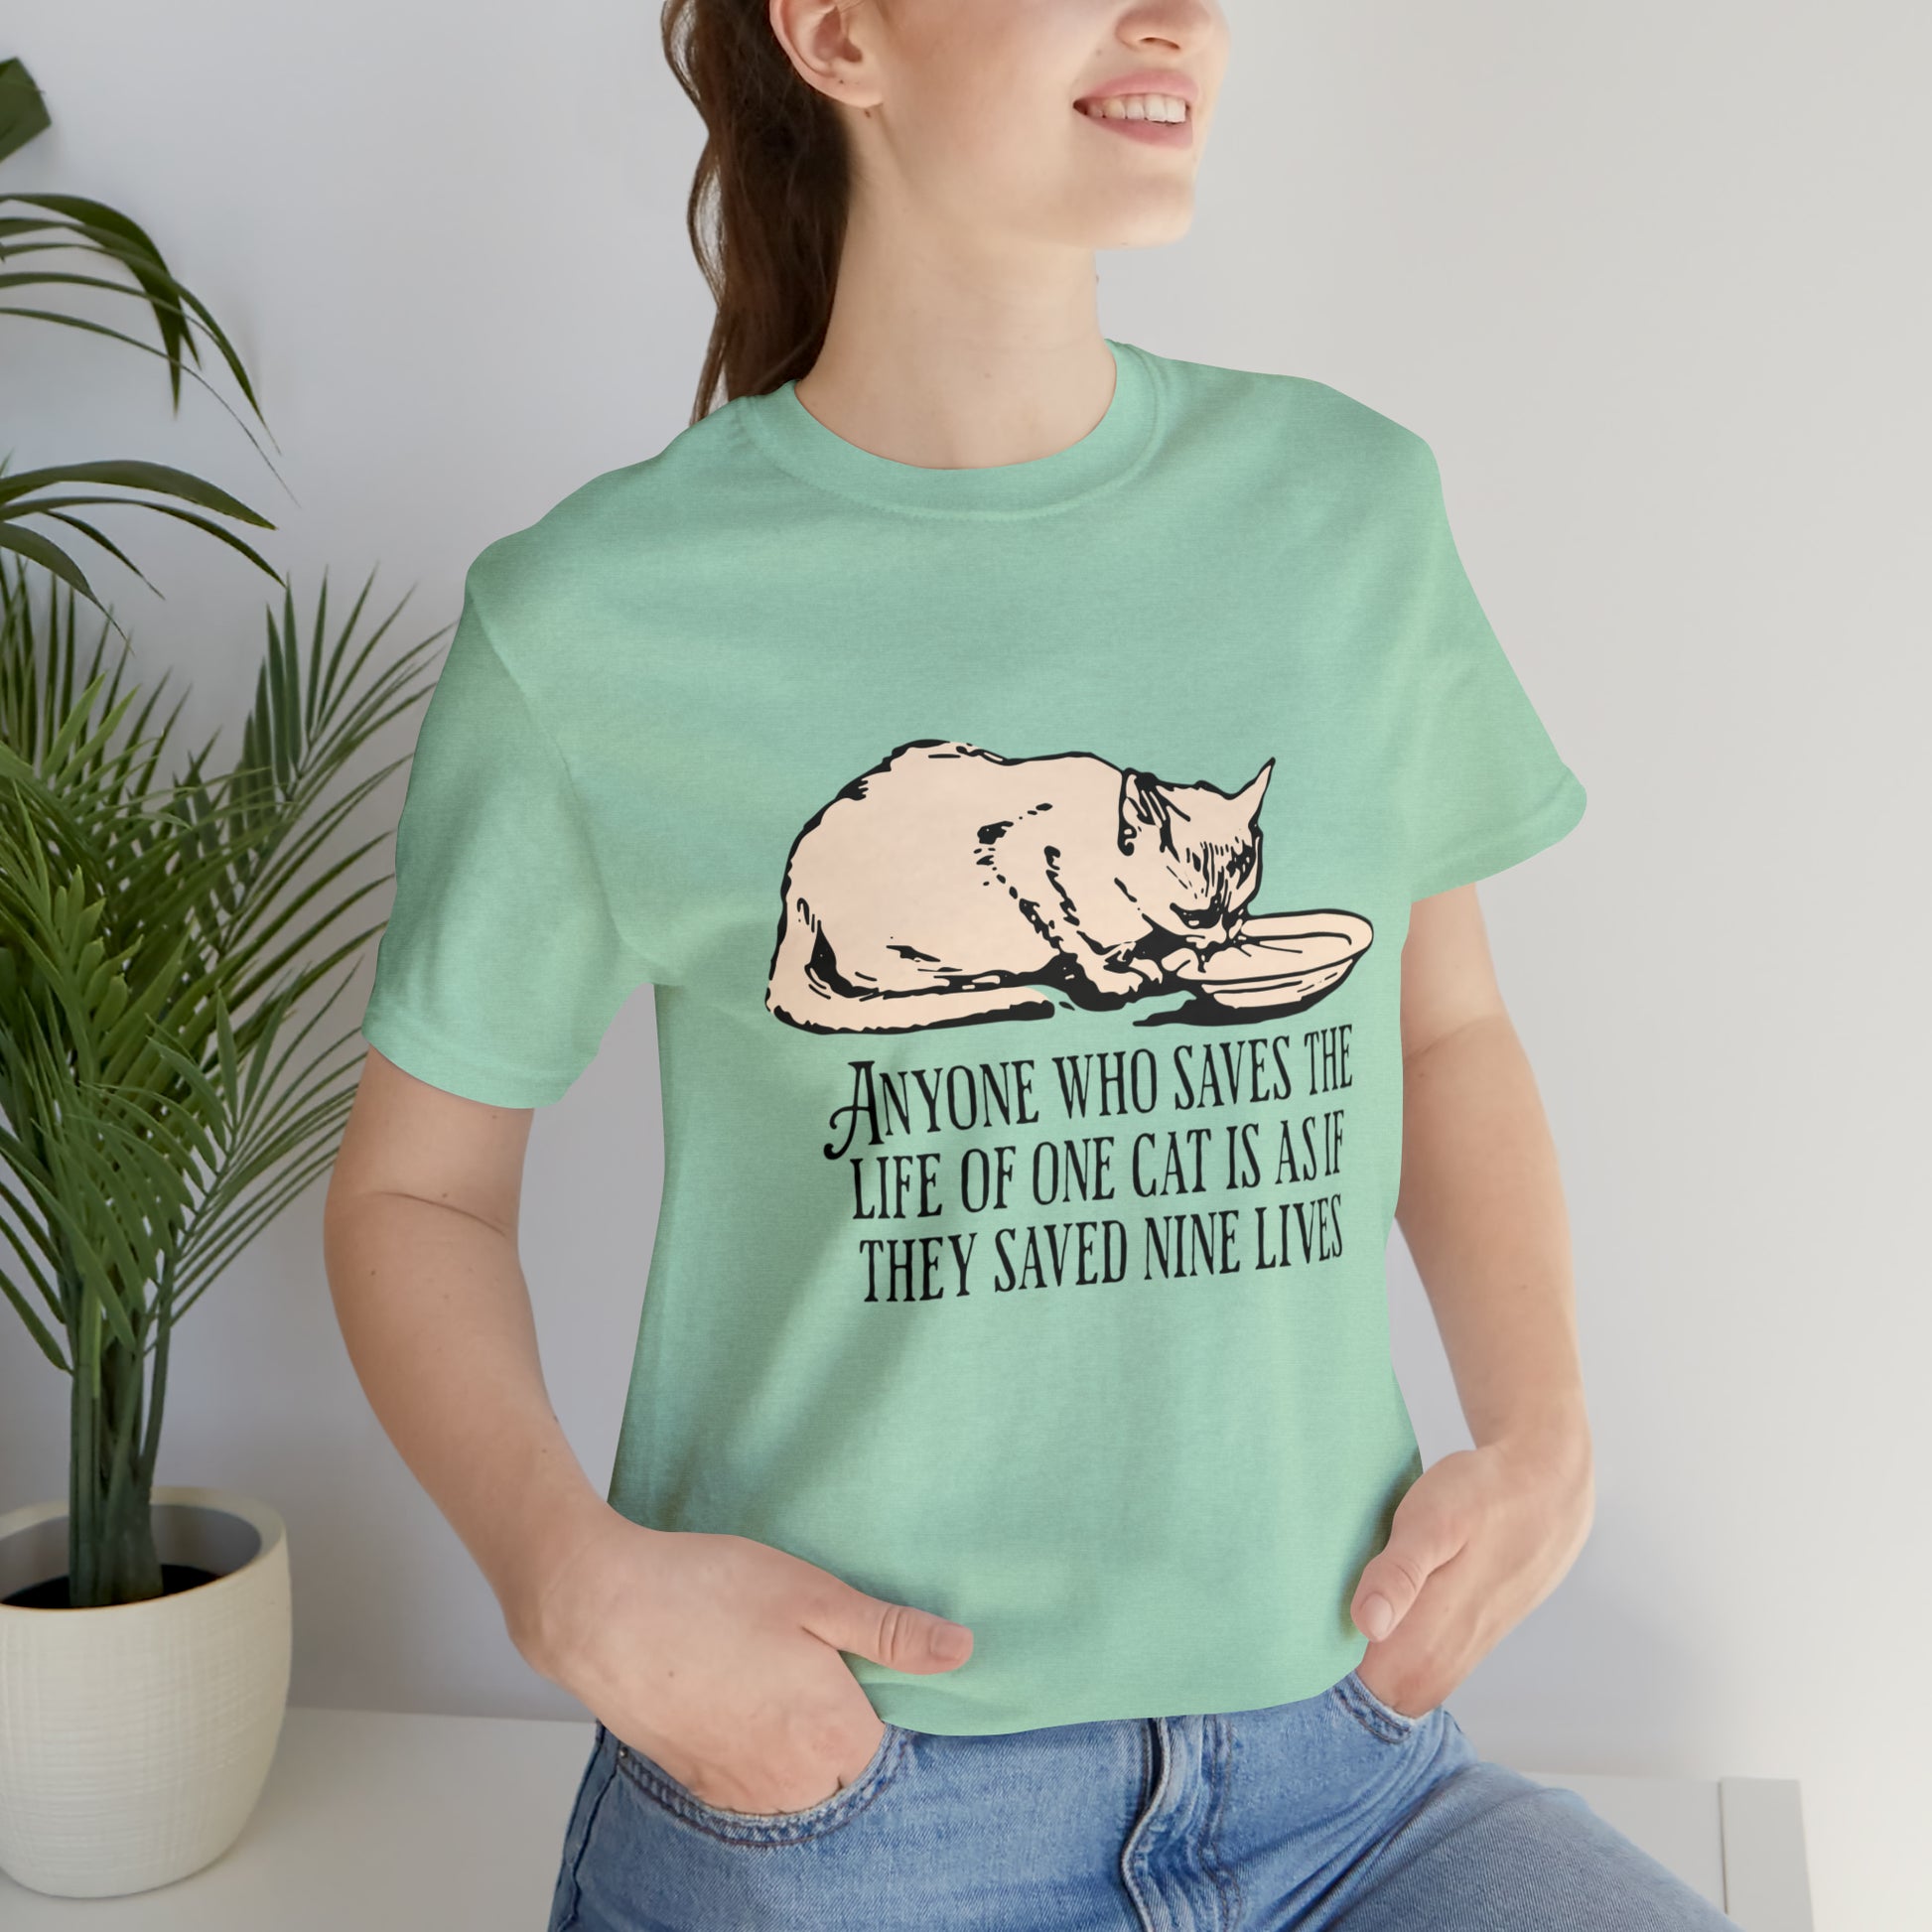 Cat quote Tshirt, stray cat shirt, funny cat tee, cute cat tee shirt, cat lover Unisex Jersey Short Sleeve Tee, cat mom gift, cat lover gift